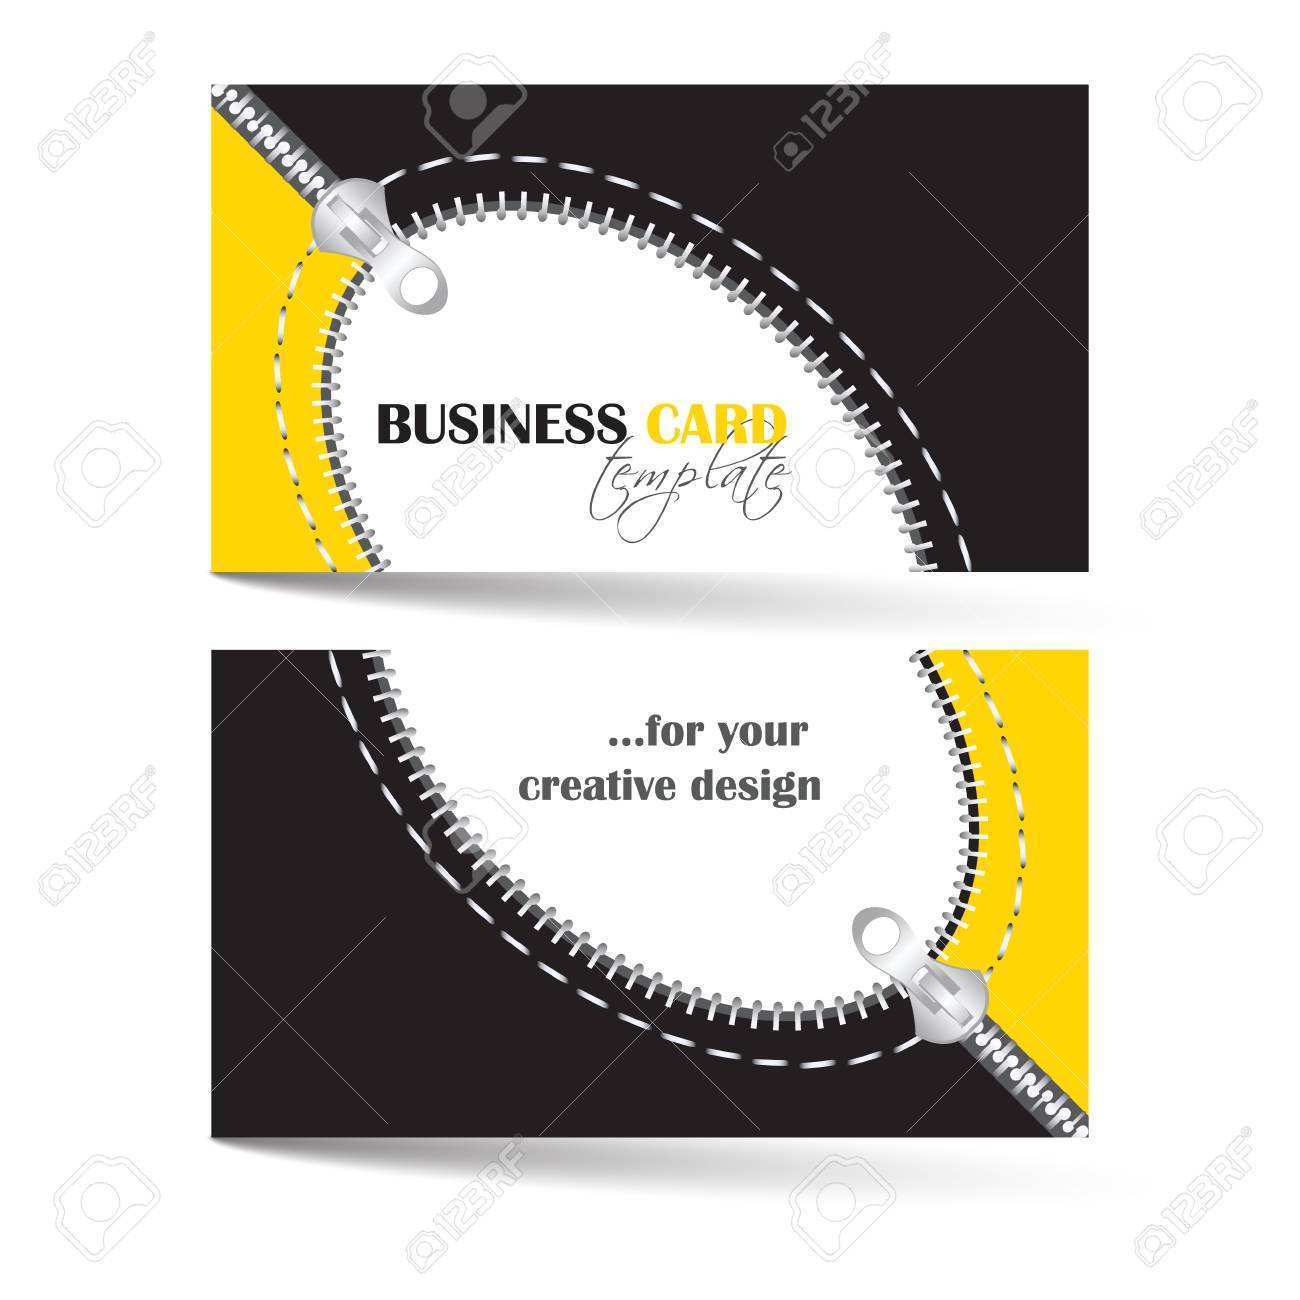 60 Free Business Card Template Zip With Stunning Design by Business Card Template Zip